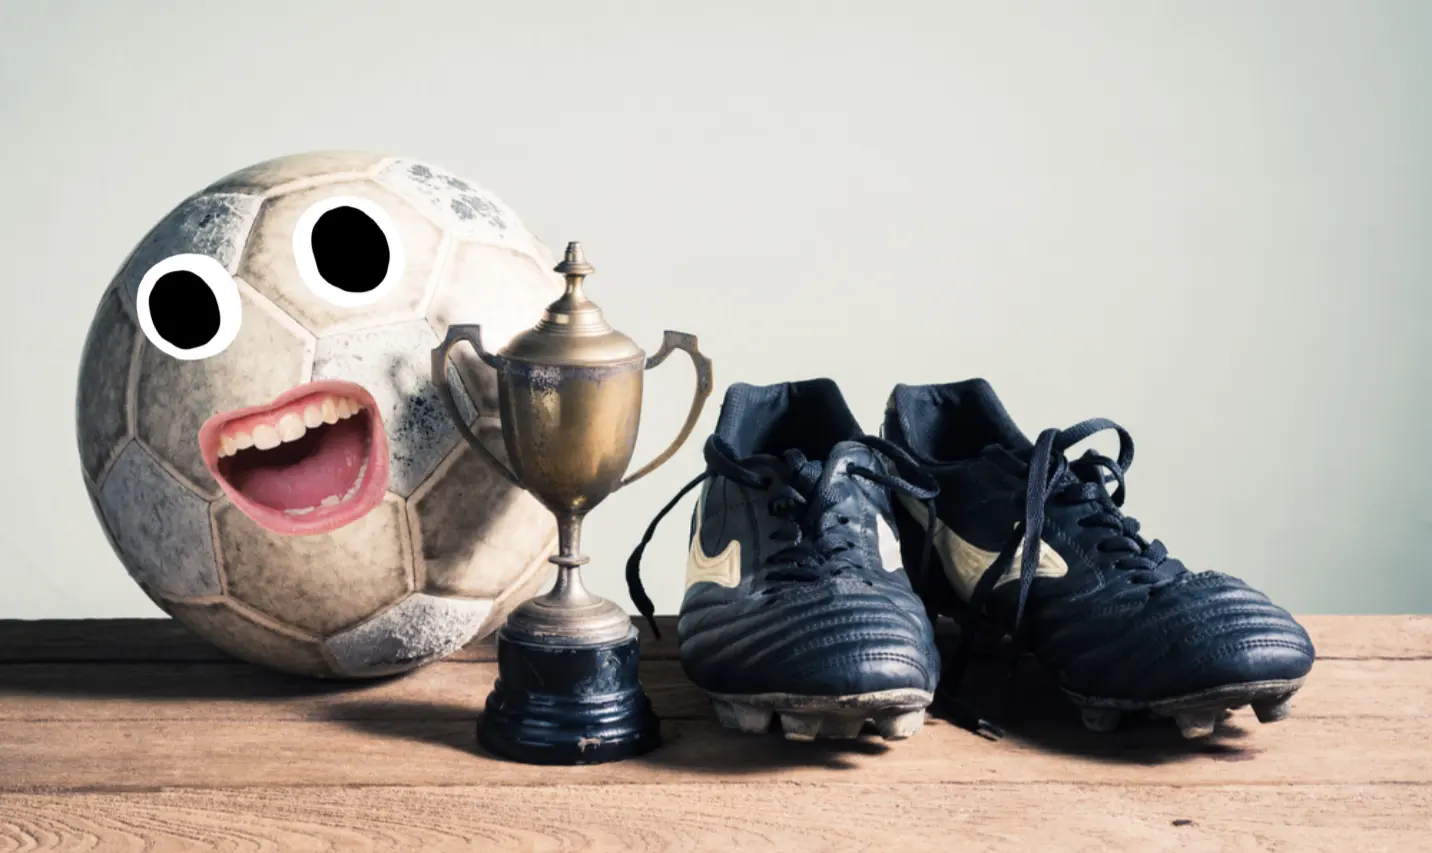 A football trophy and boots